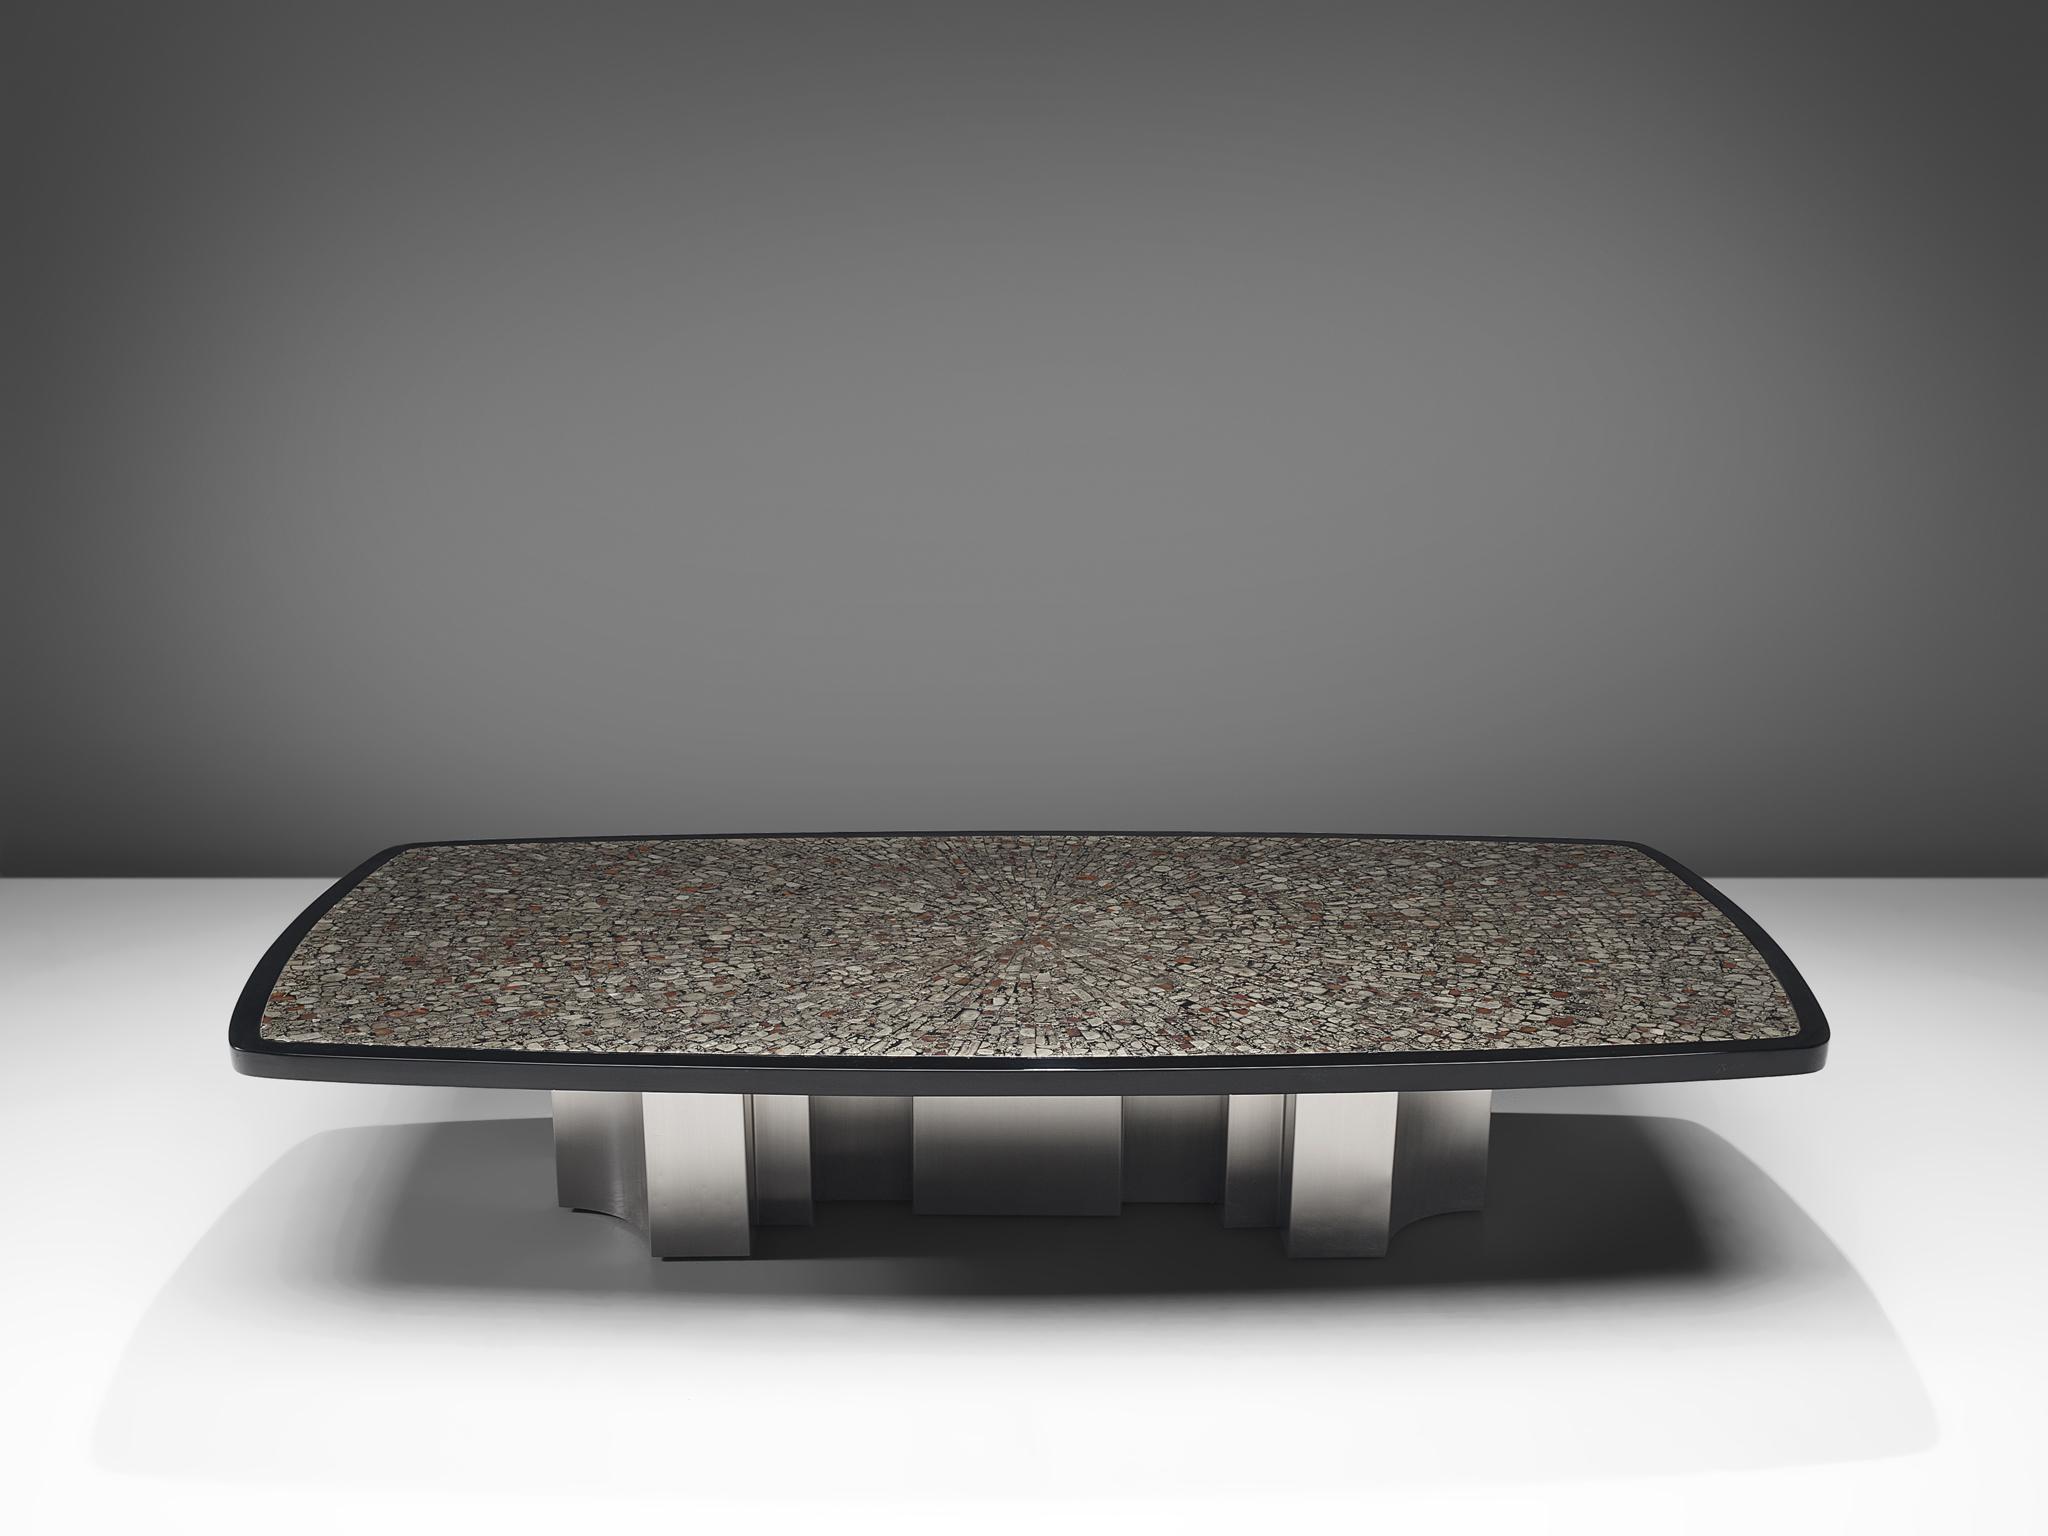 Jean Claude Dresse, large and unique coffee table, metal, resin, marcasite, Belgium, circa 1970

This extraordinary piece was crafted with great eye for proportions and detail, typical for the work of Dresse. The luxurious character of the Marcasite